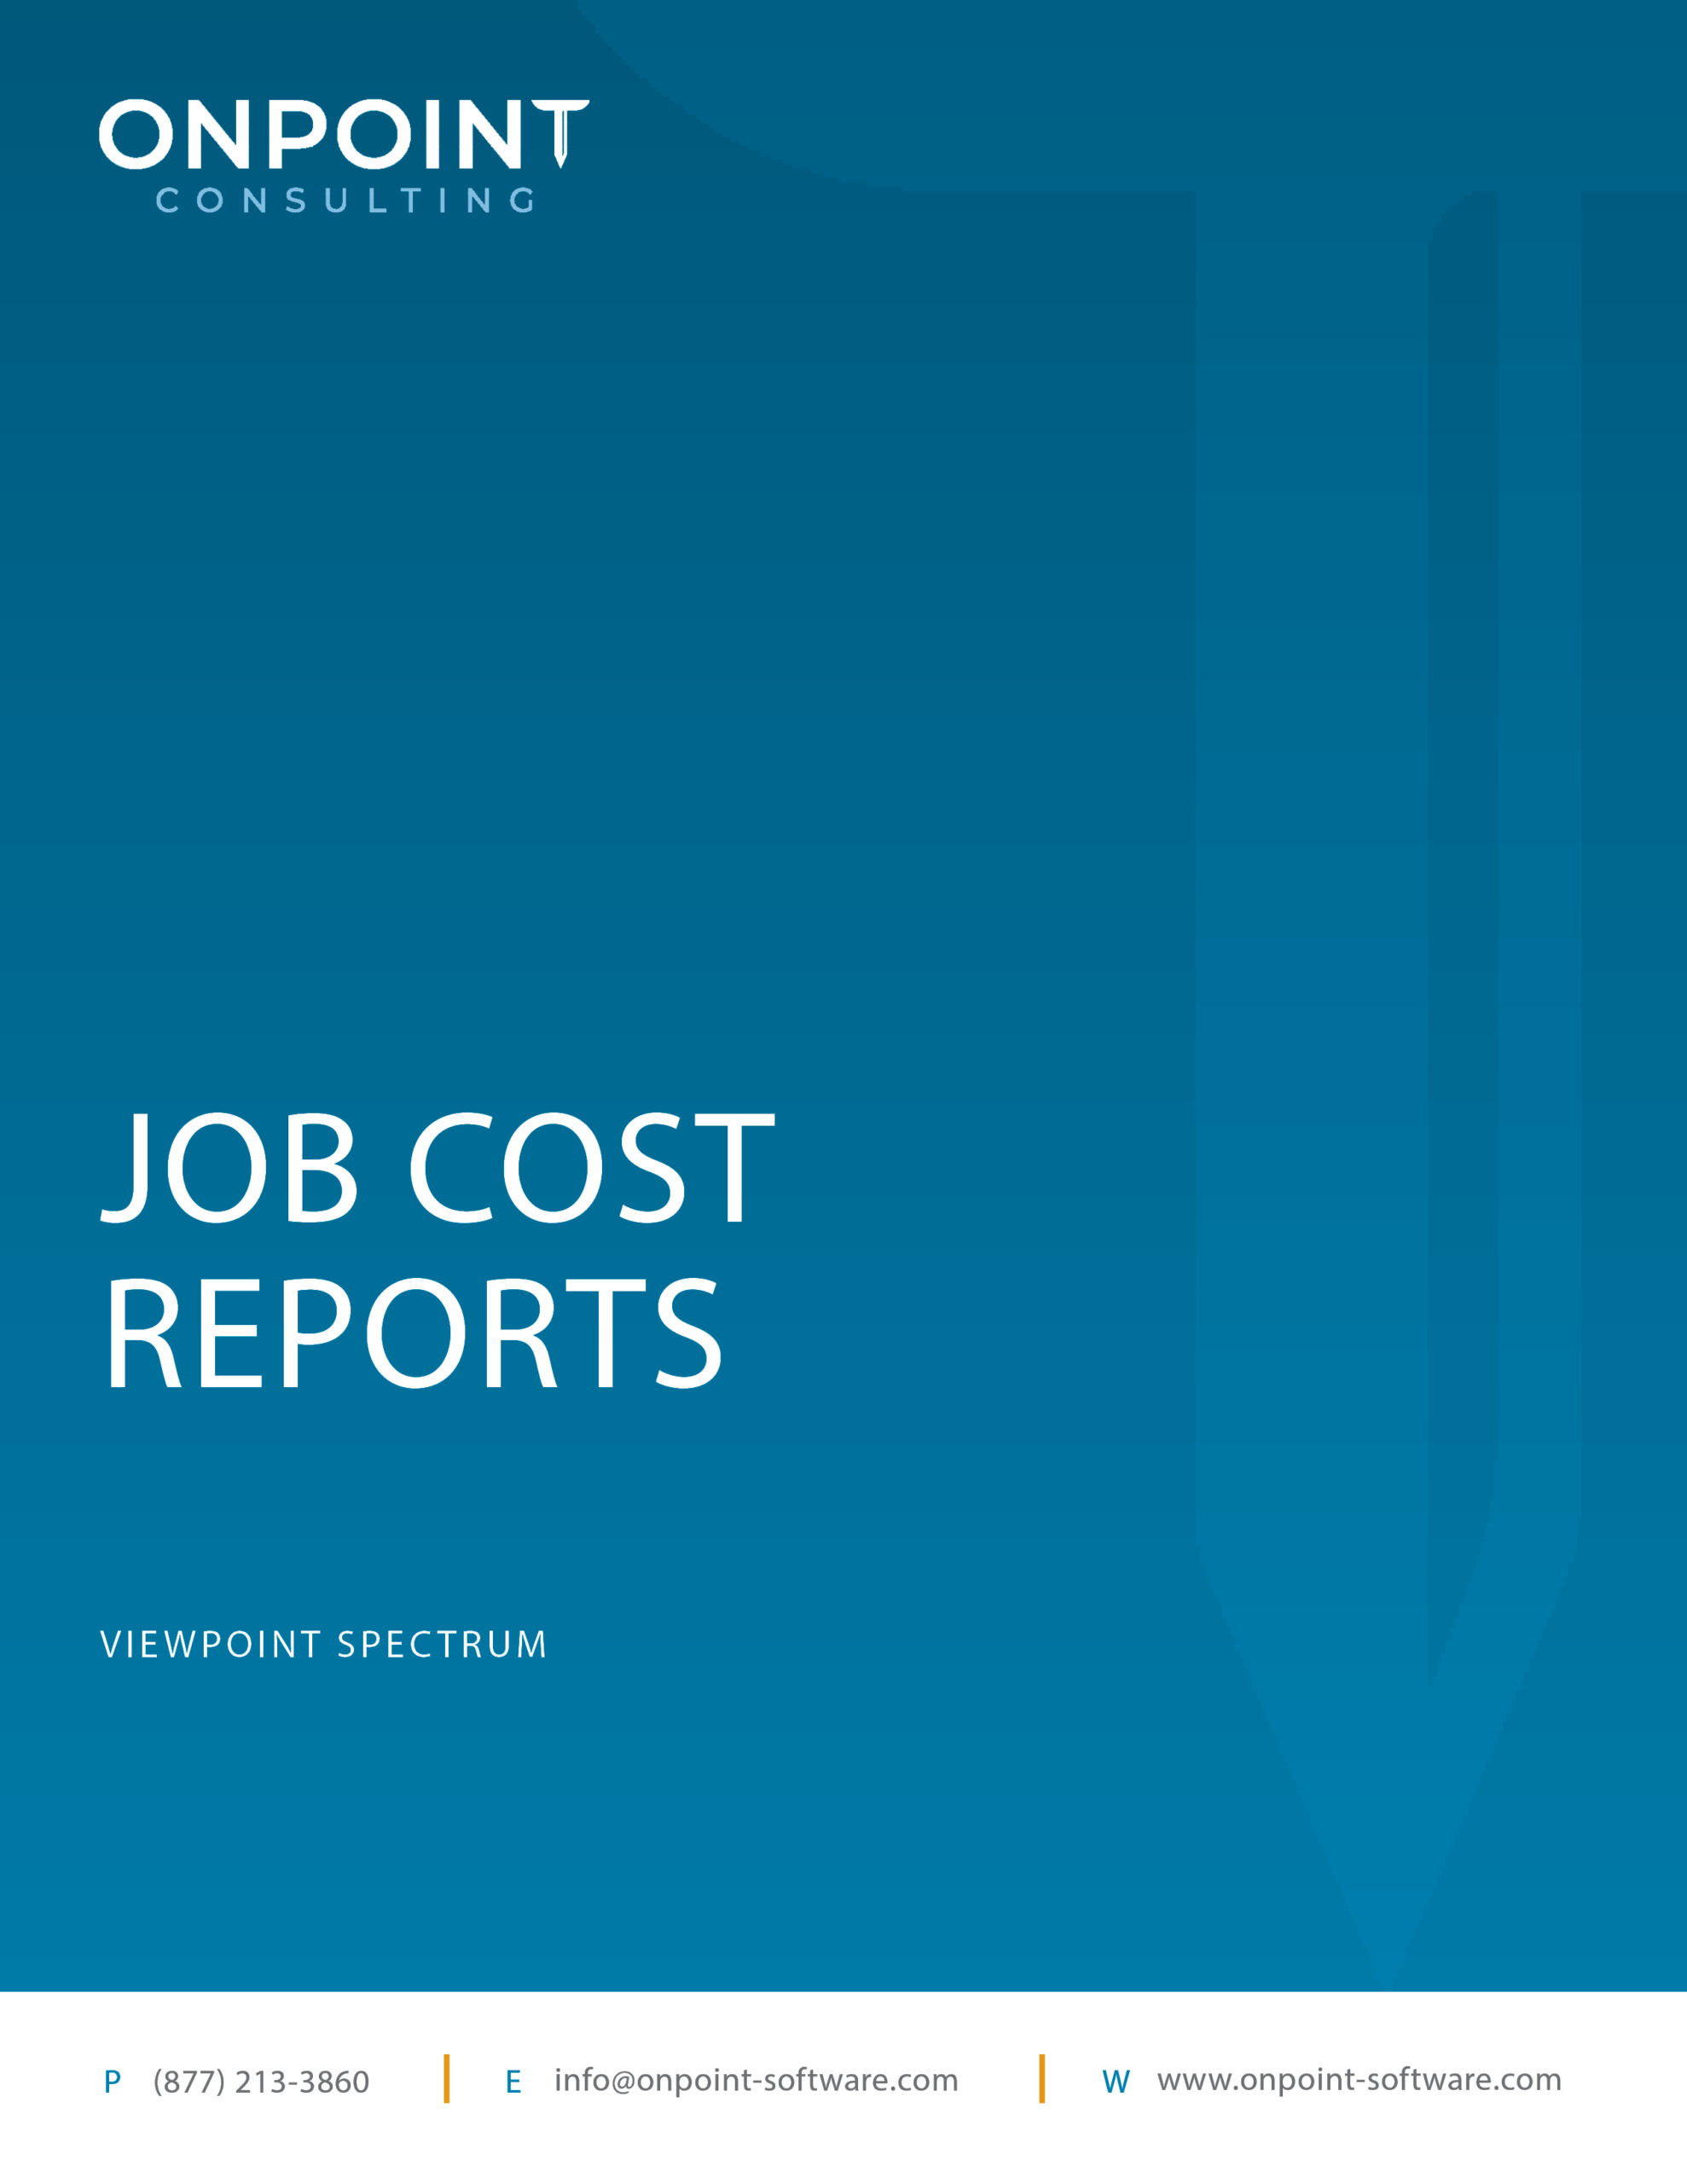 Viewpoint Spectrum Job Cost Reports Summary